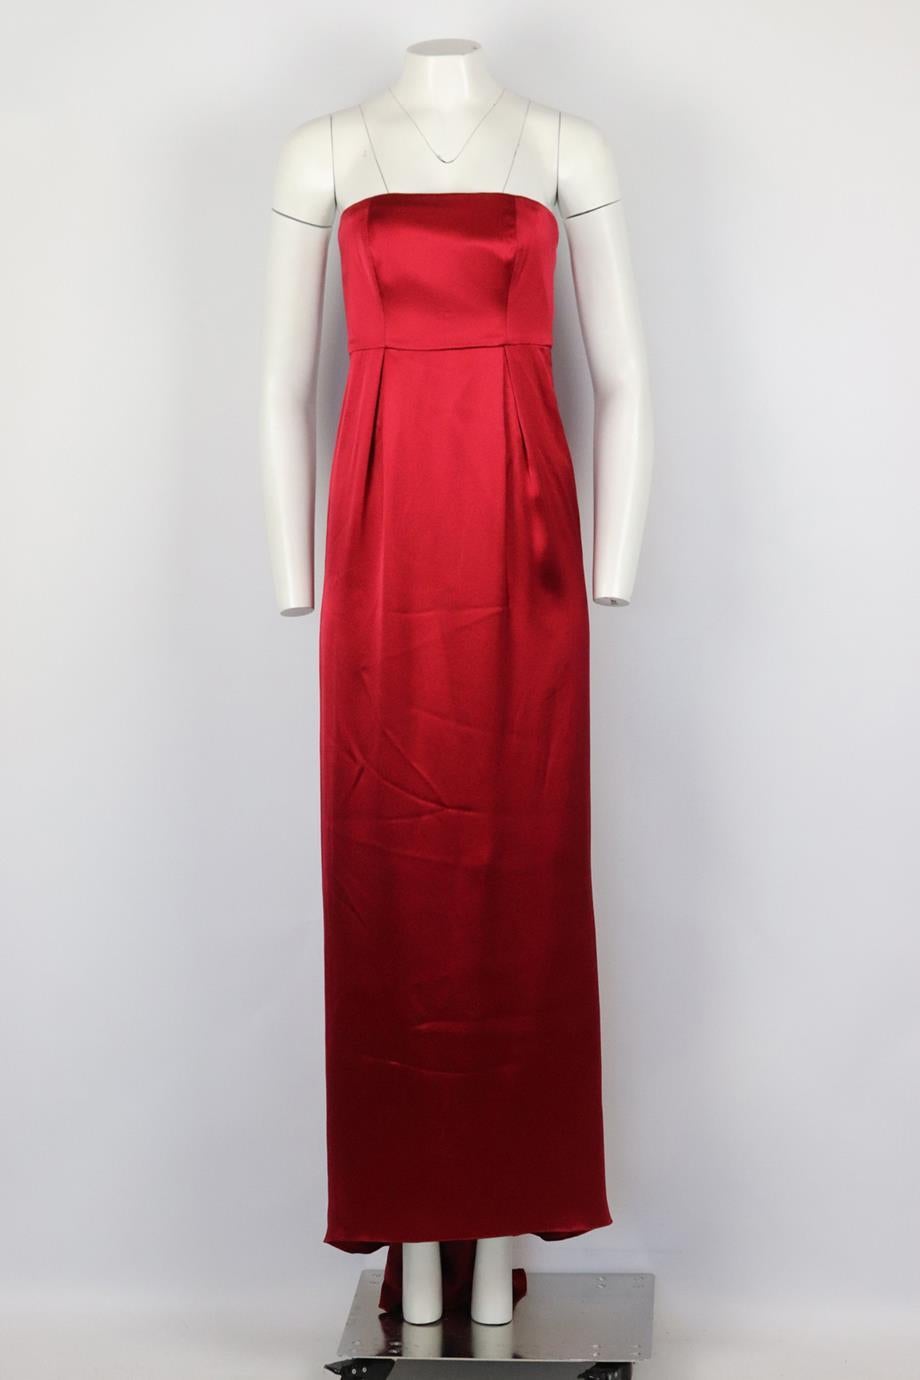 Jenny Packham strapless satin gown. Red. Sleeveless, strapless. Zip fastening at back. Size: Small (UK 8, US 4, FR 36, IT 40). Bust: 29.2 in. Waist: 26 in. Hips: 36.8 in. Length: 56 in. Good condition - Size and compostion label cut out for comfort.